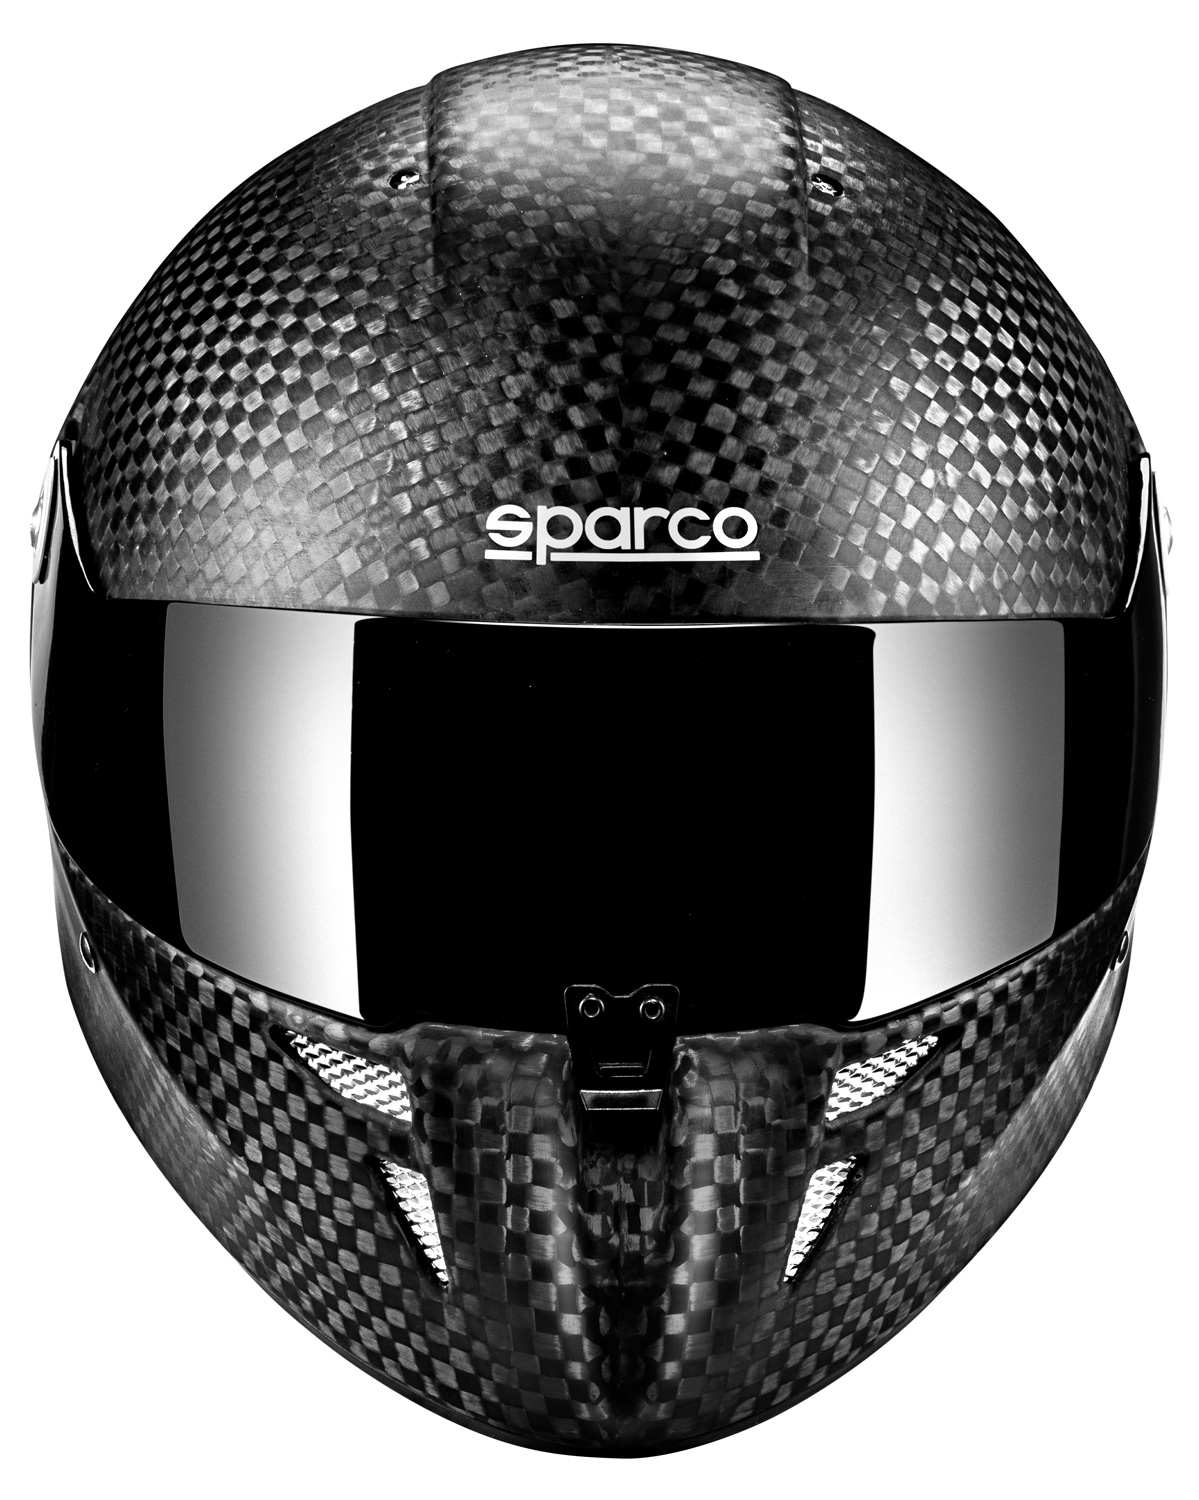 Sparco Helm Prime 8860